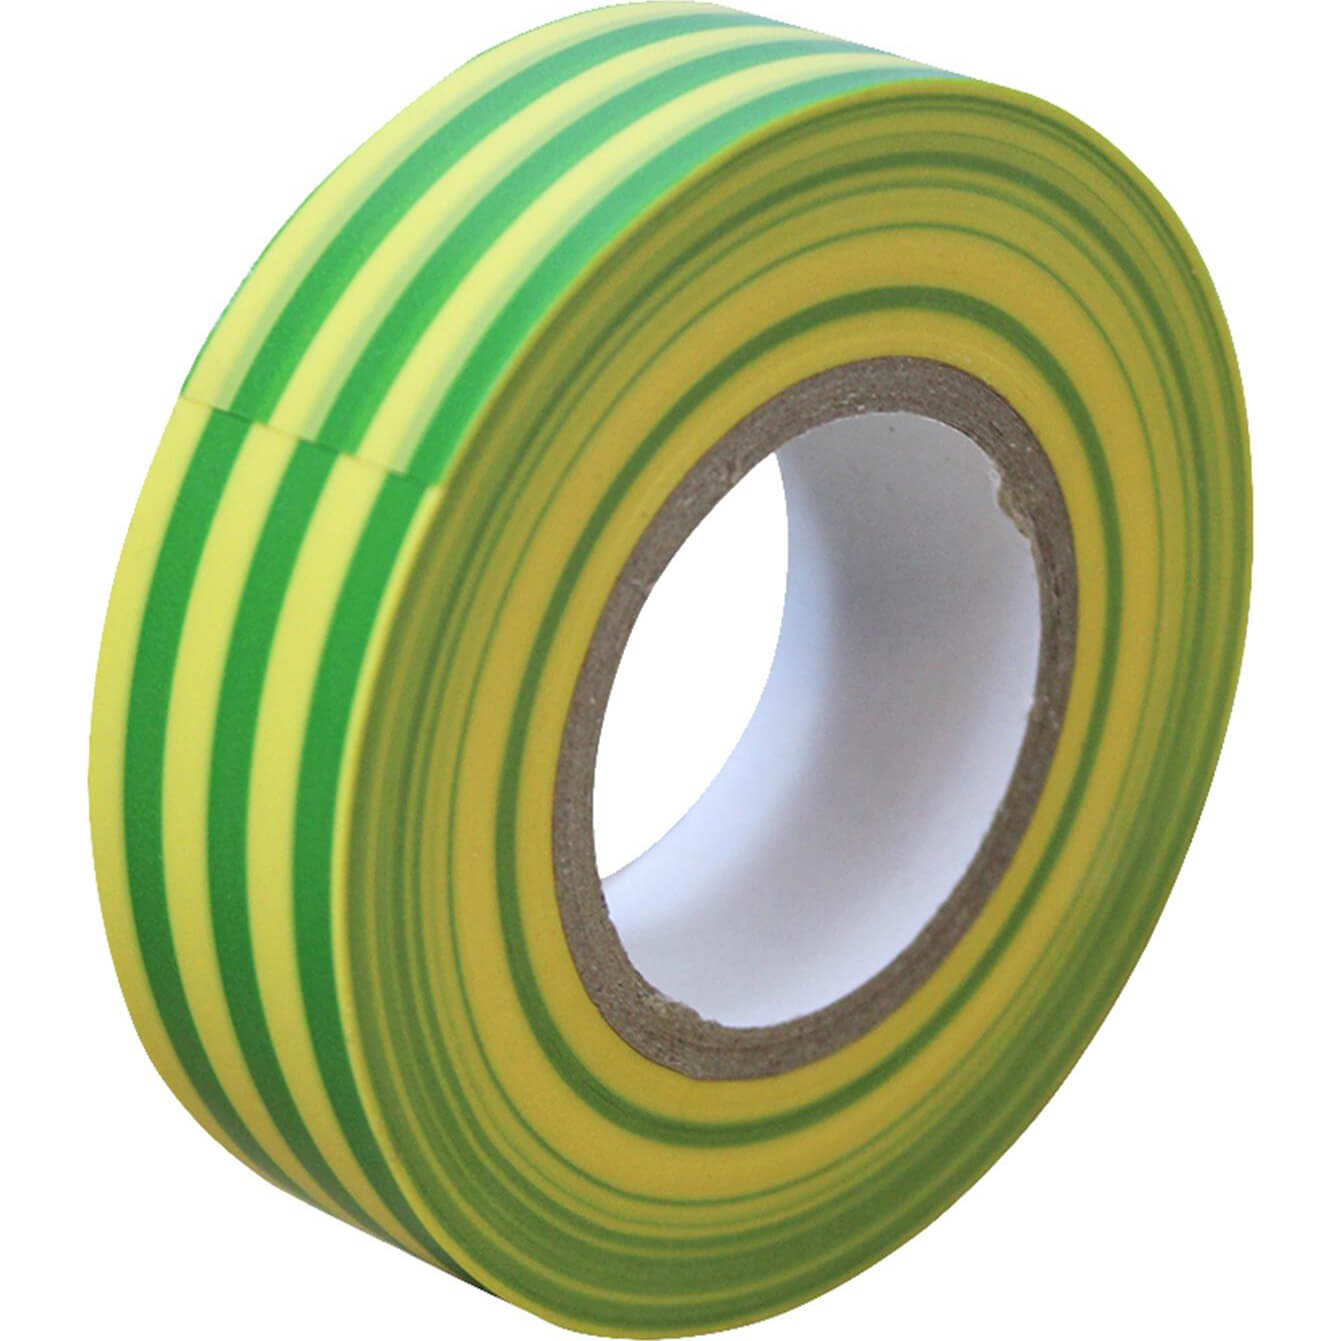 Image of Sirius Electrians PVC Insulation Tape Yellow / Green 19mm 33m